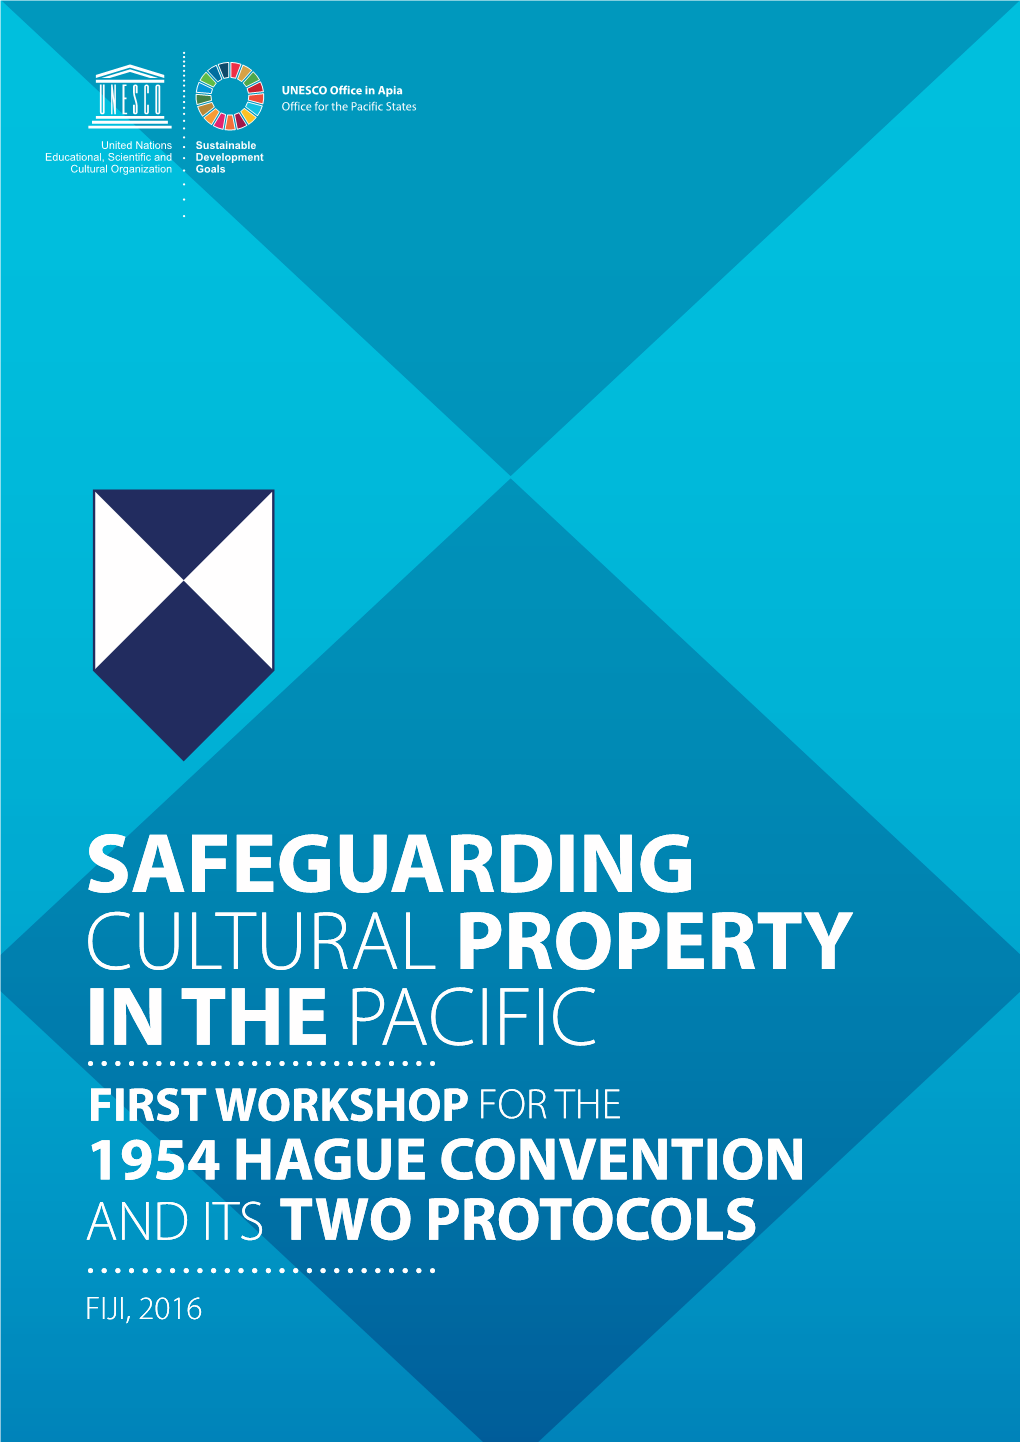 Pacific Workshop on the Hague Convention for the Protection Of